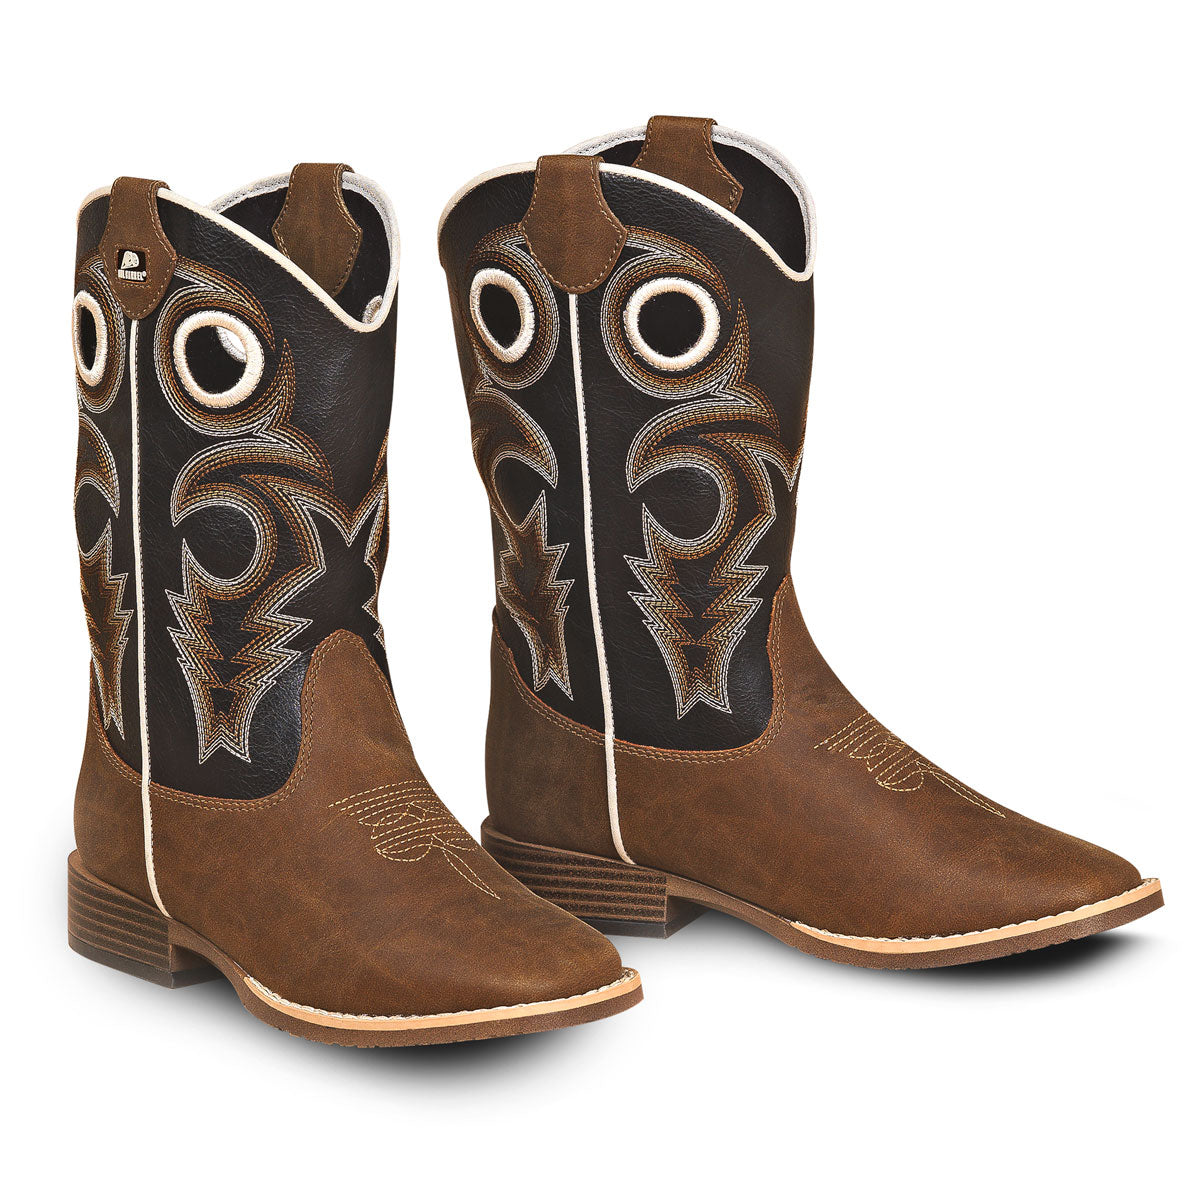 Double Barrel Trace Childrens Western Boots - Brown/Black